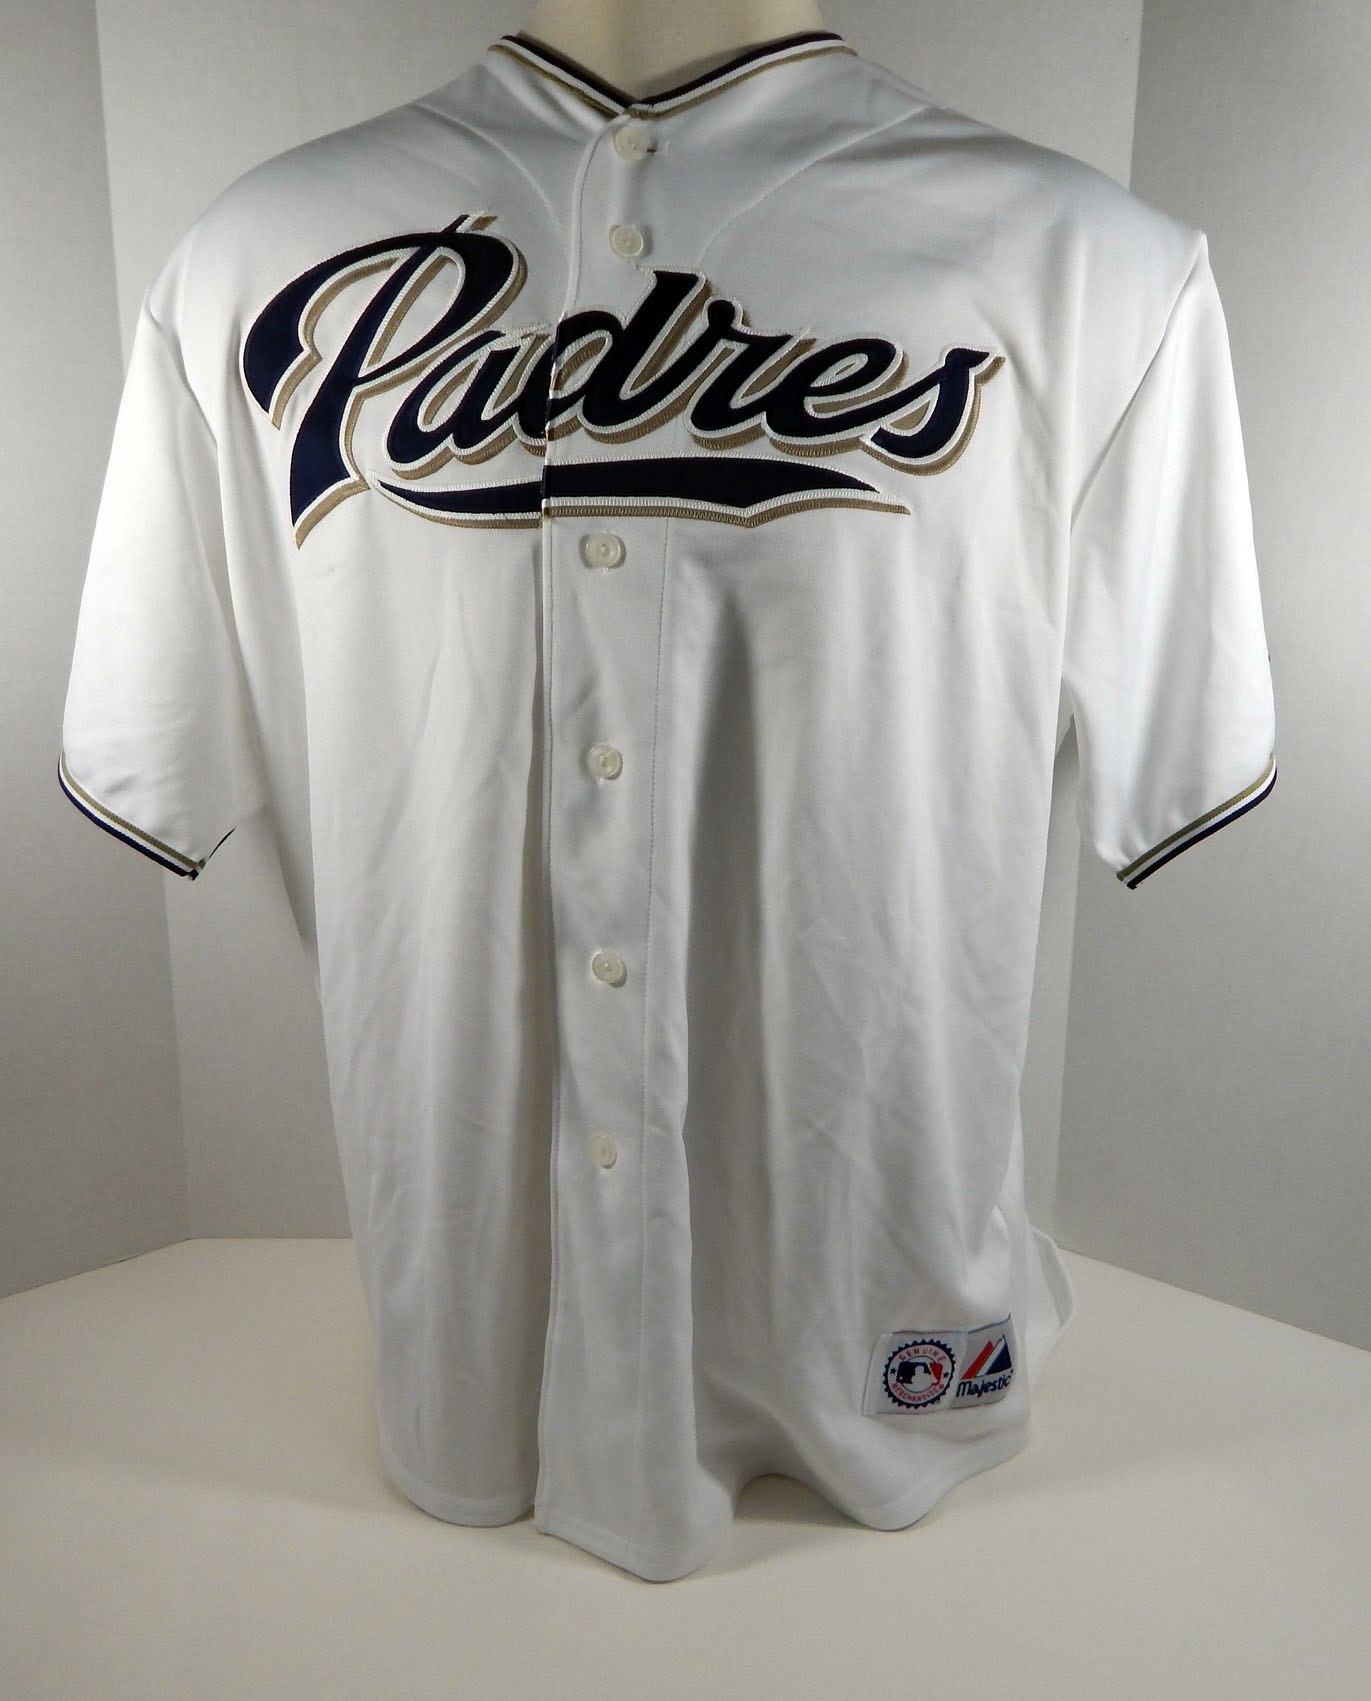 San Diego Padres Blank # Replica Authentic White Jersey | eBay